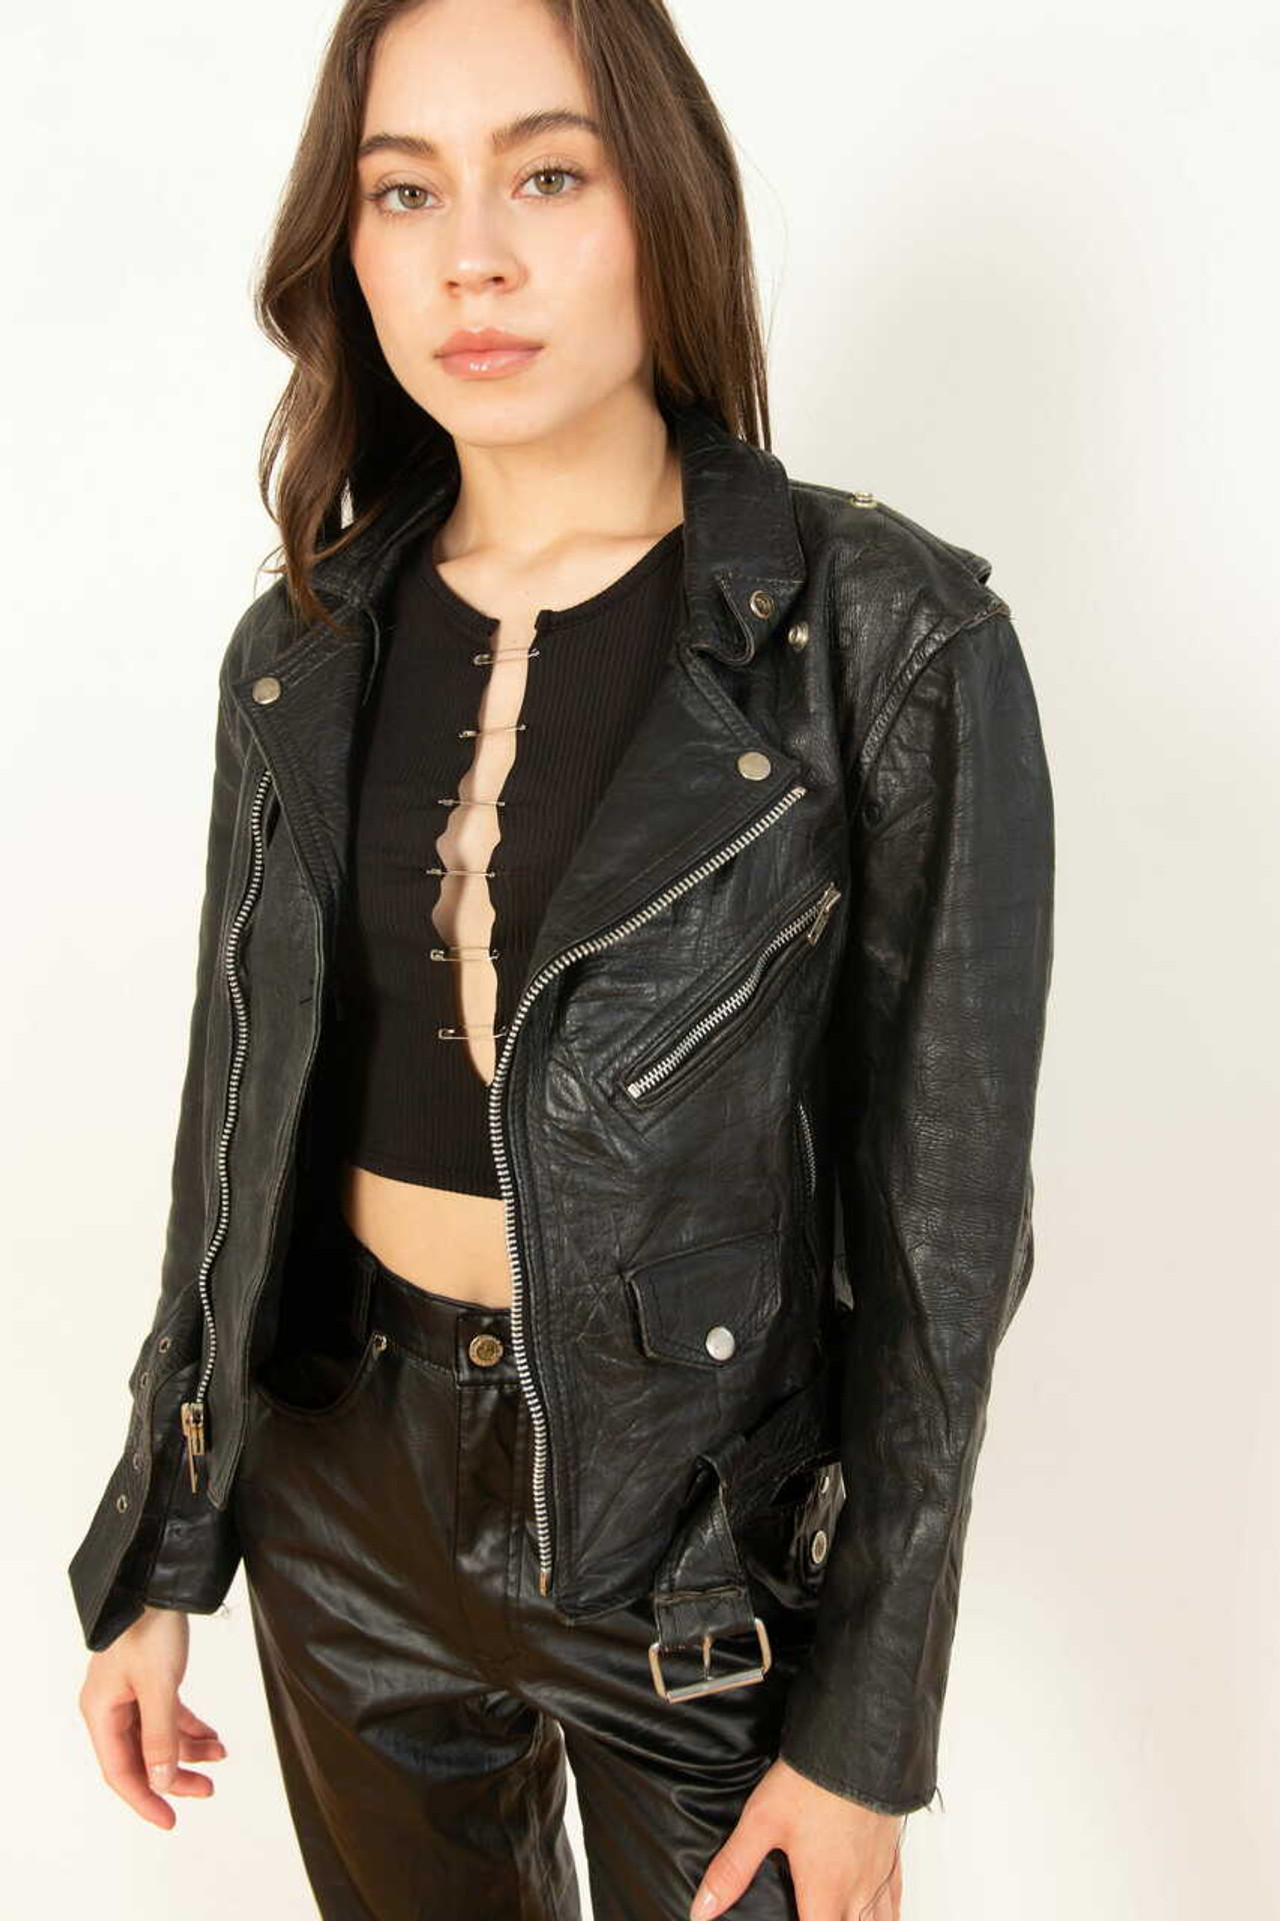 Recycled + Vintage Clothing - Vintage Leather Jackets - Ragstock.com